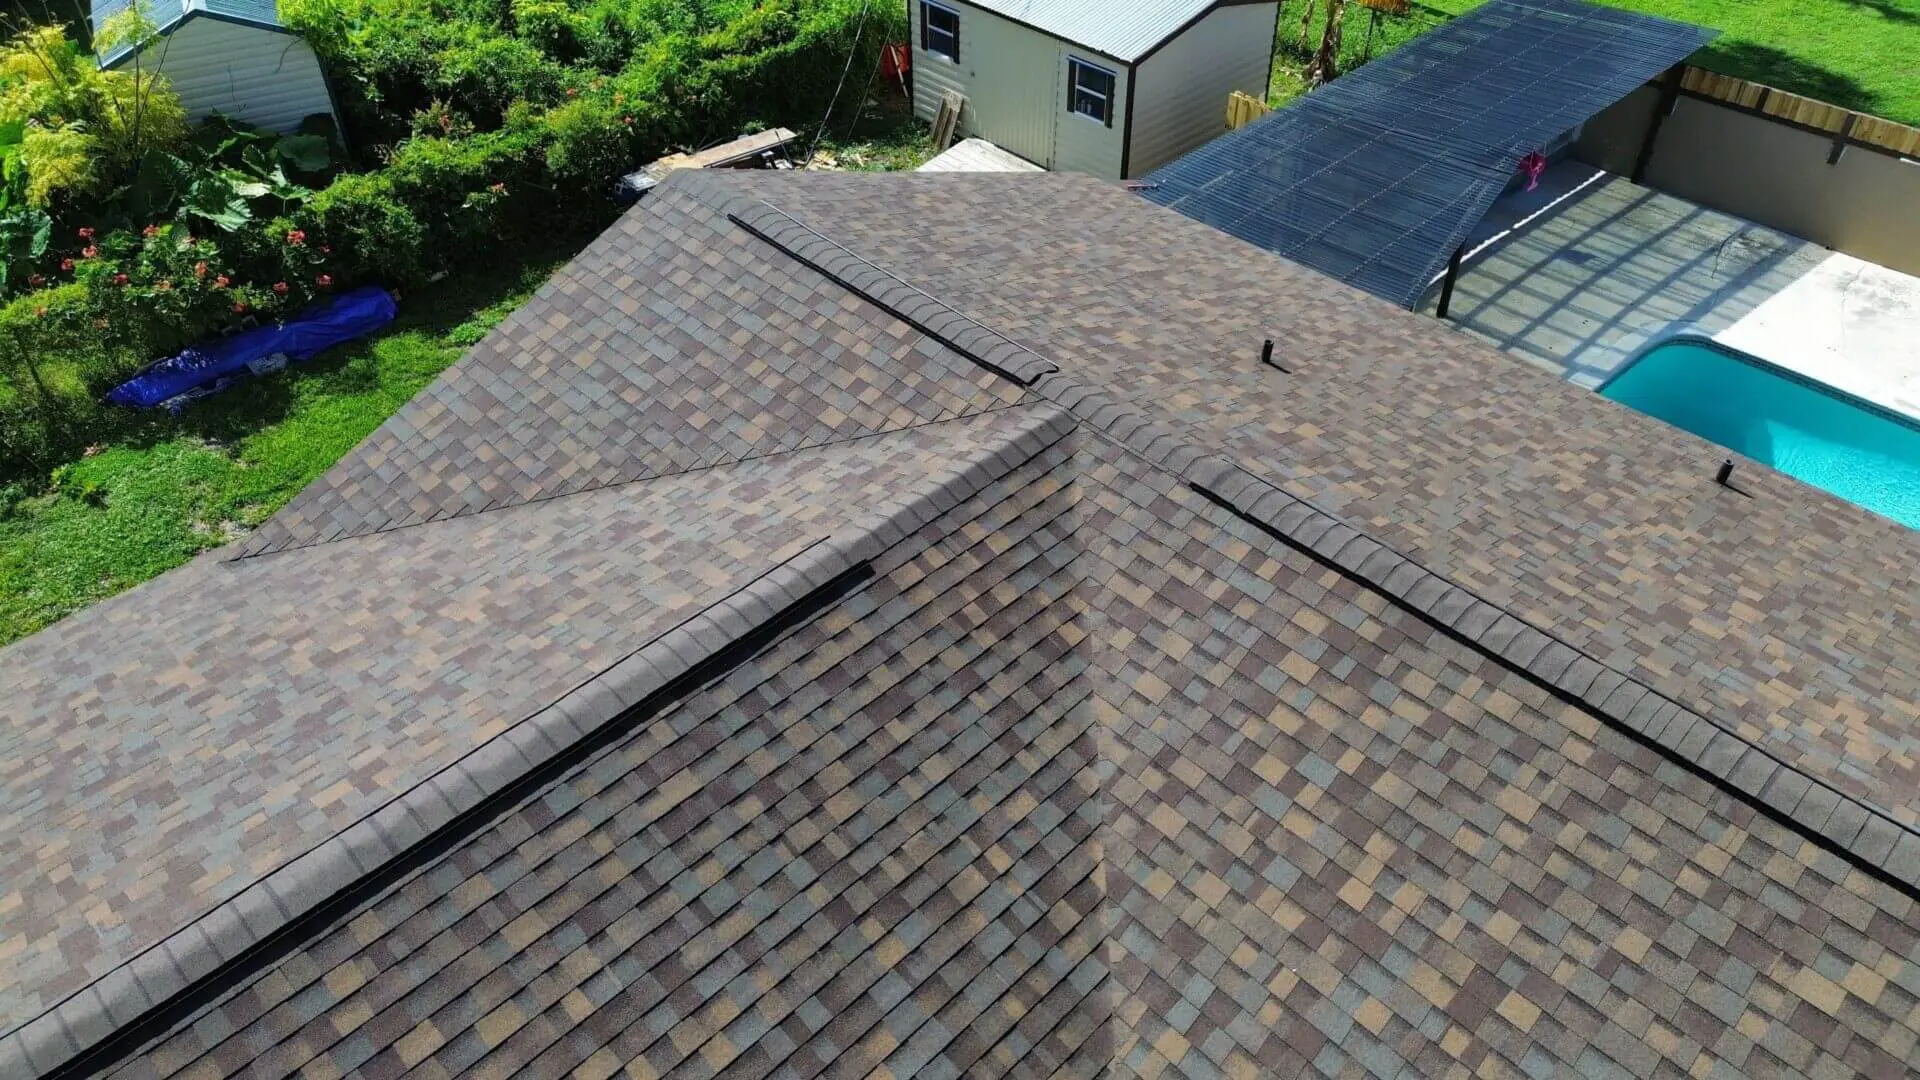 A top view of a house roof with trees around